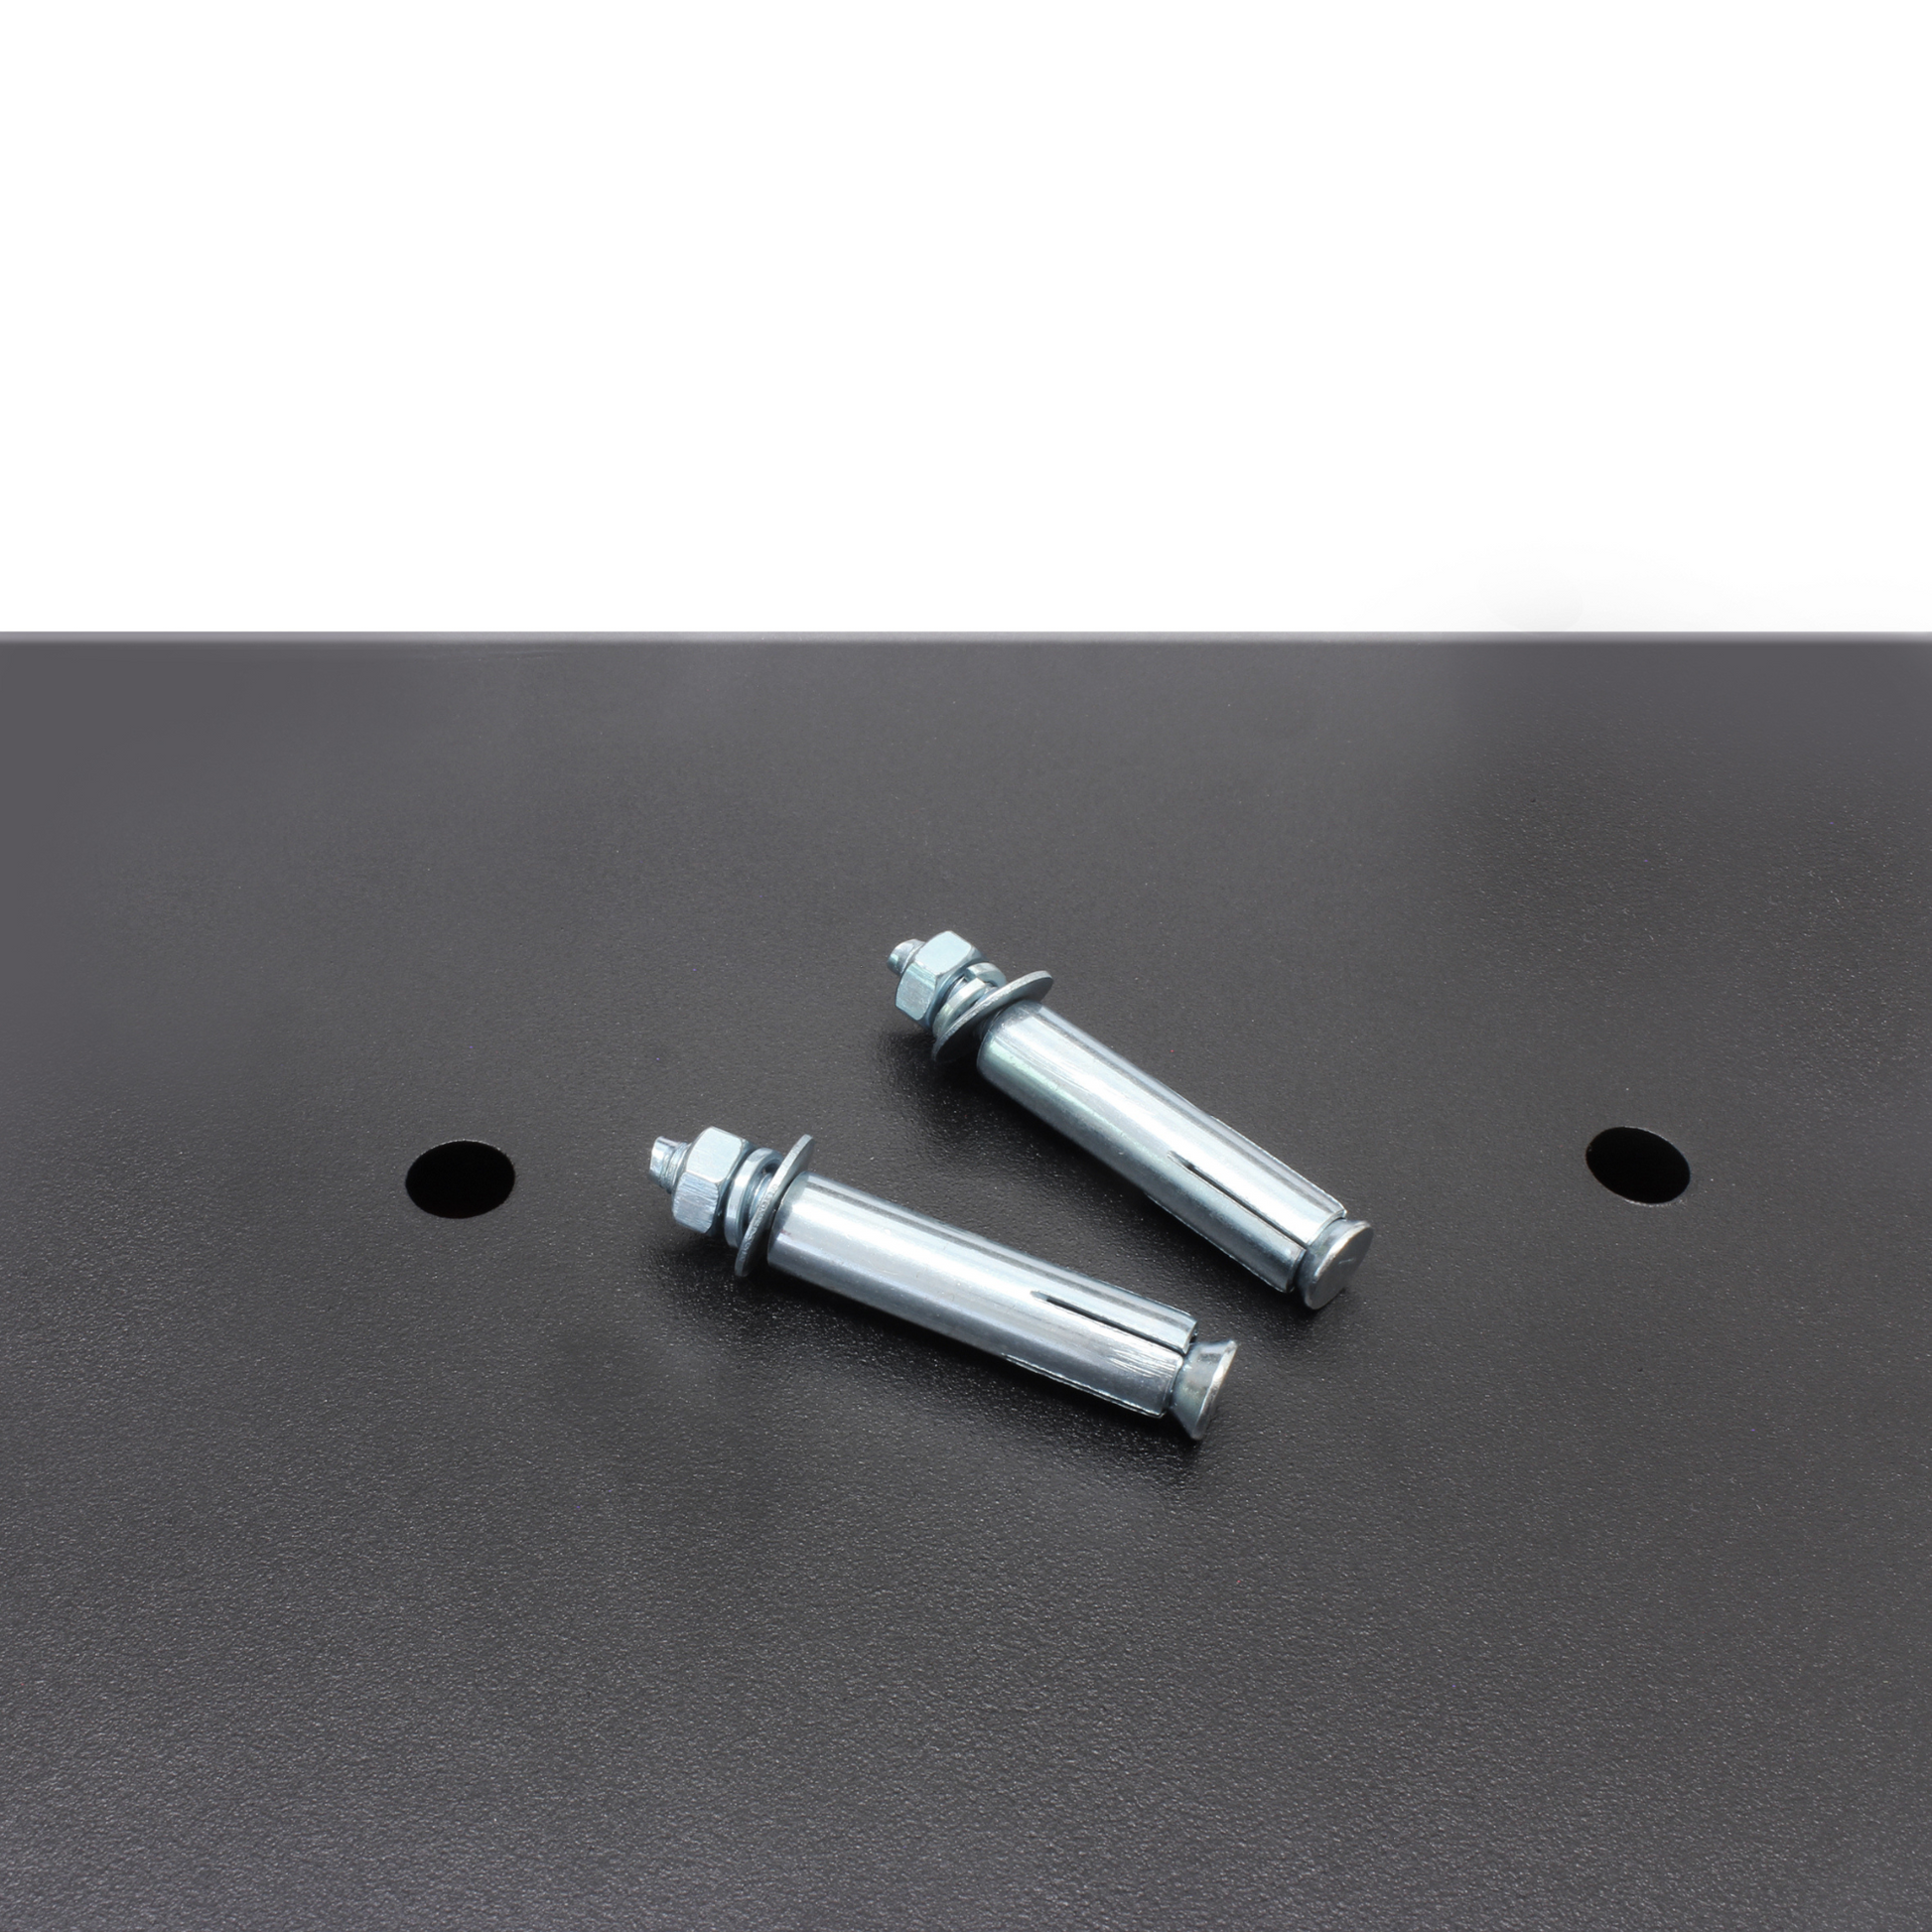 Two metal bolts rest on the black surface of the surface of the Cathedral Products EA25 16 Litre Electronic Digital Safe, next to pre-drilled mounting holes for secure installation.